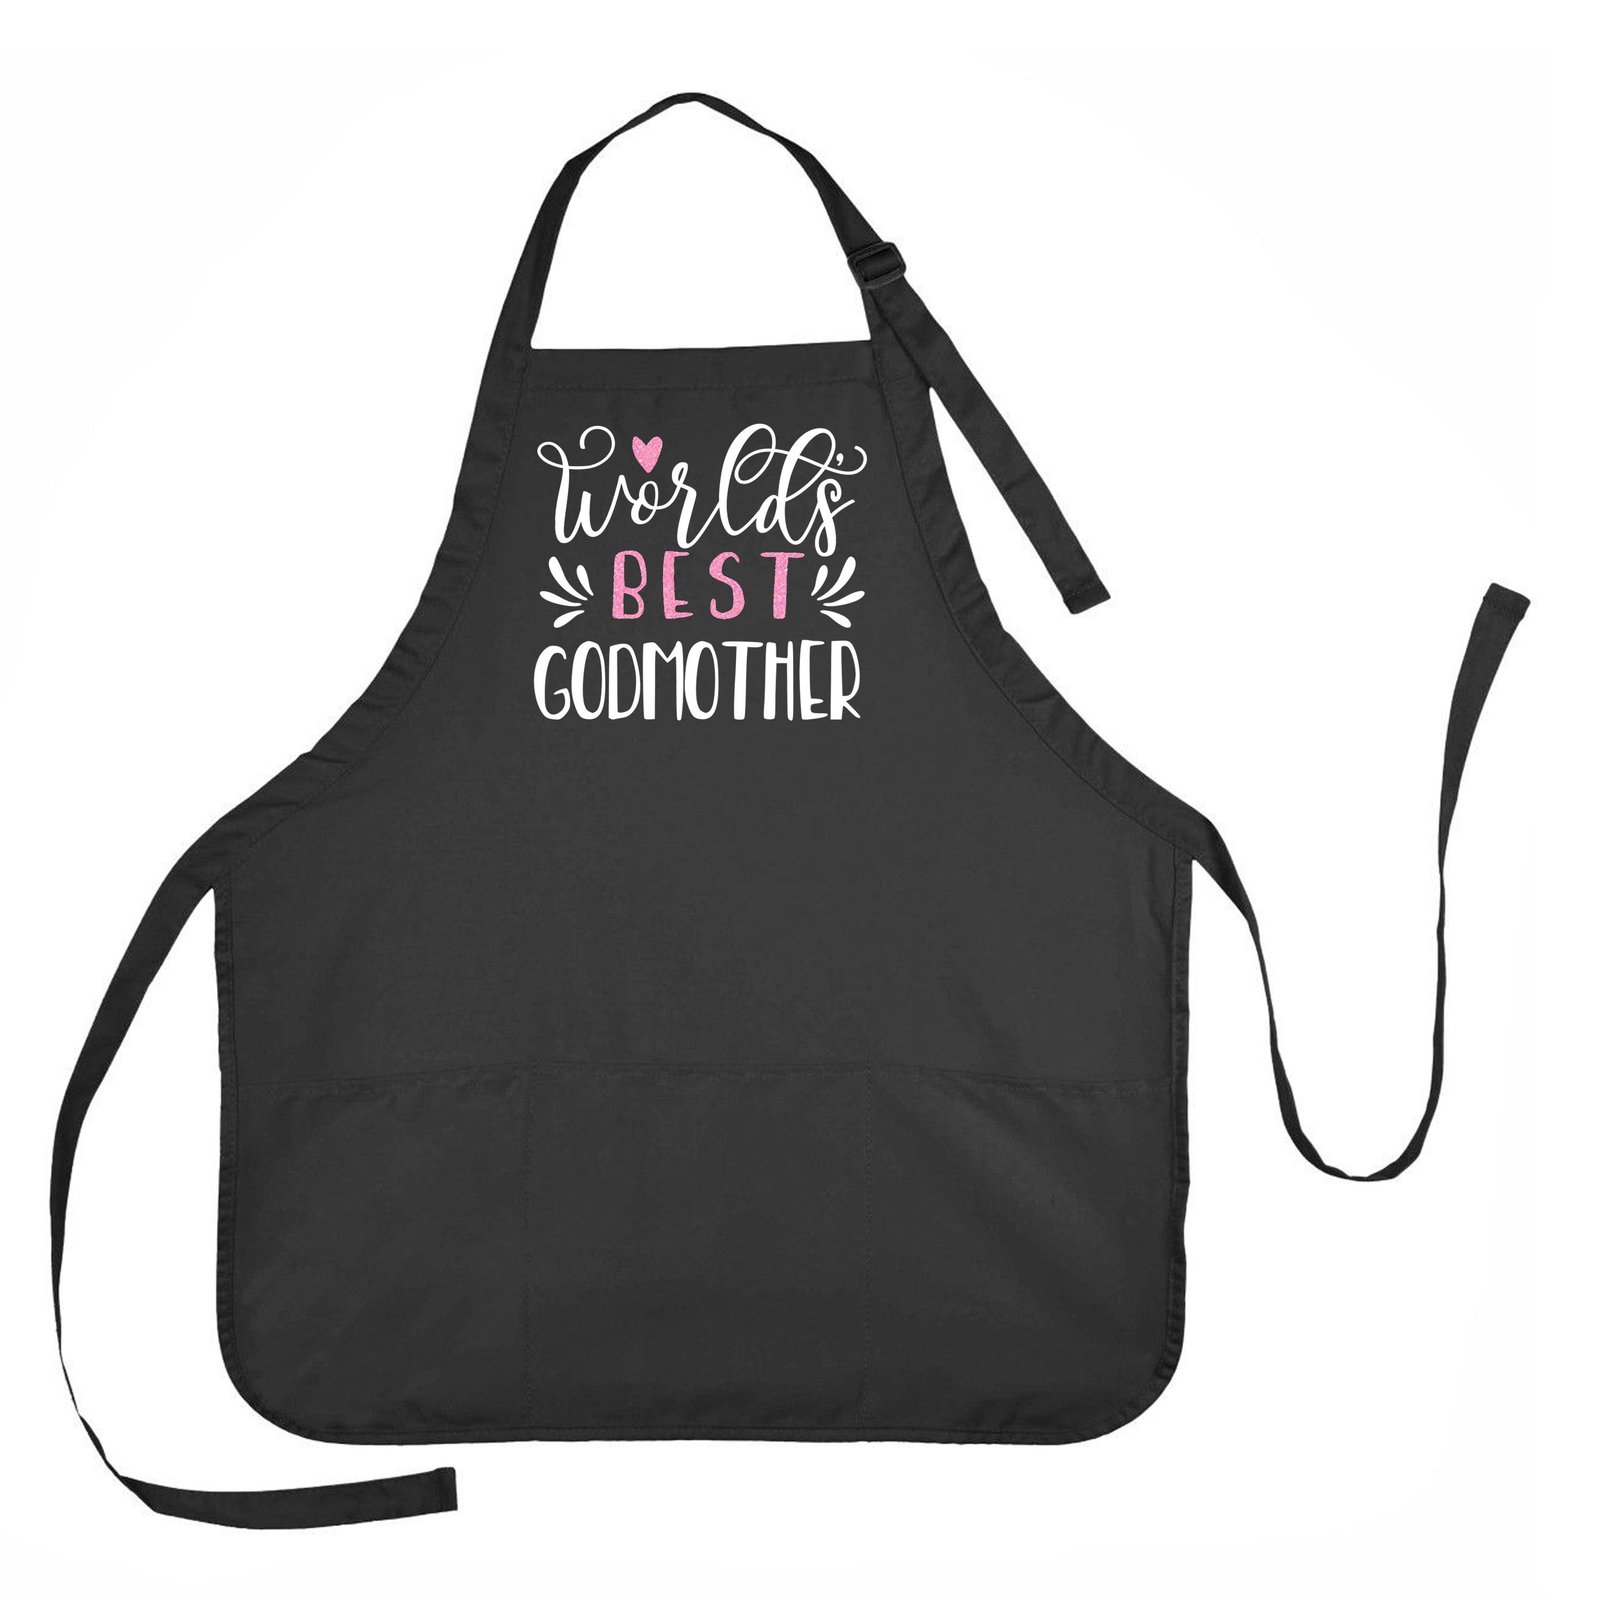 Primary image for Worlds Best Godmother Apron, Worlds Best Godmother Apron, Worlds Best Godmother 